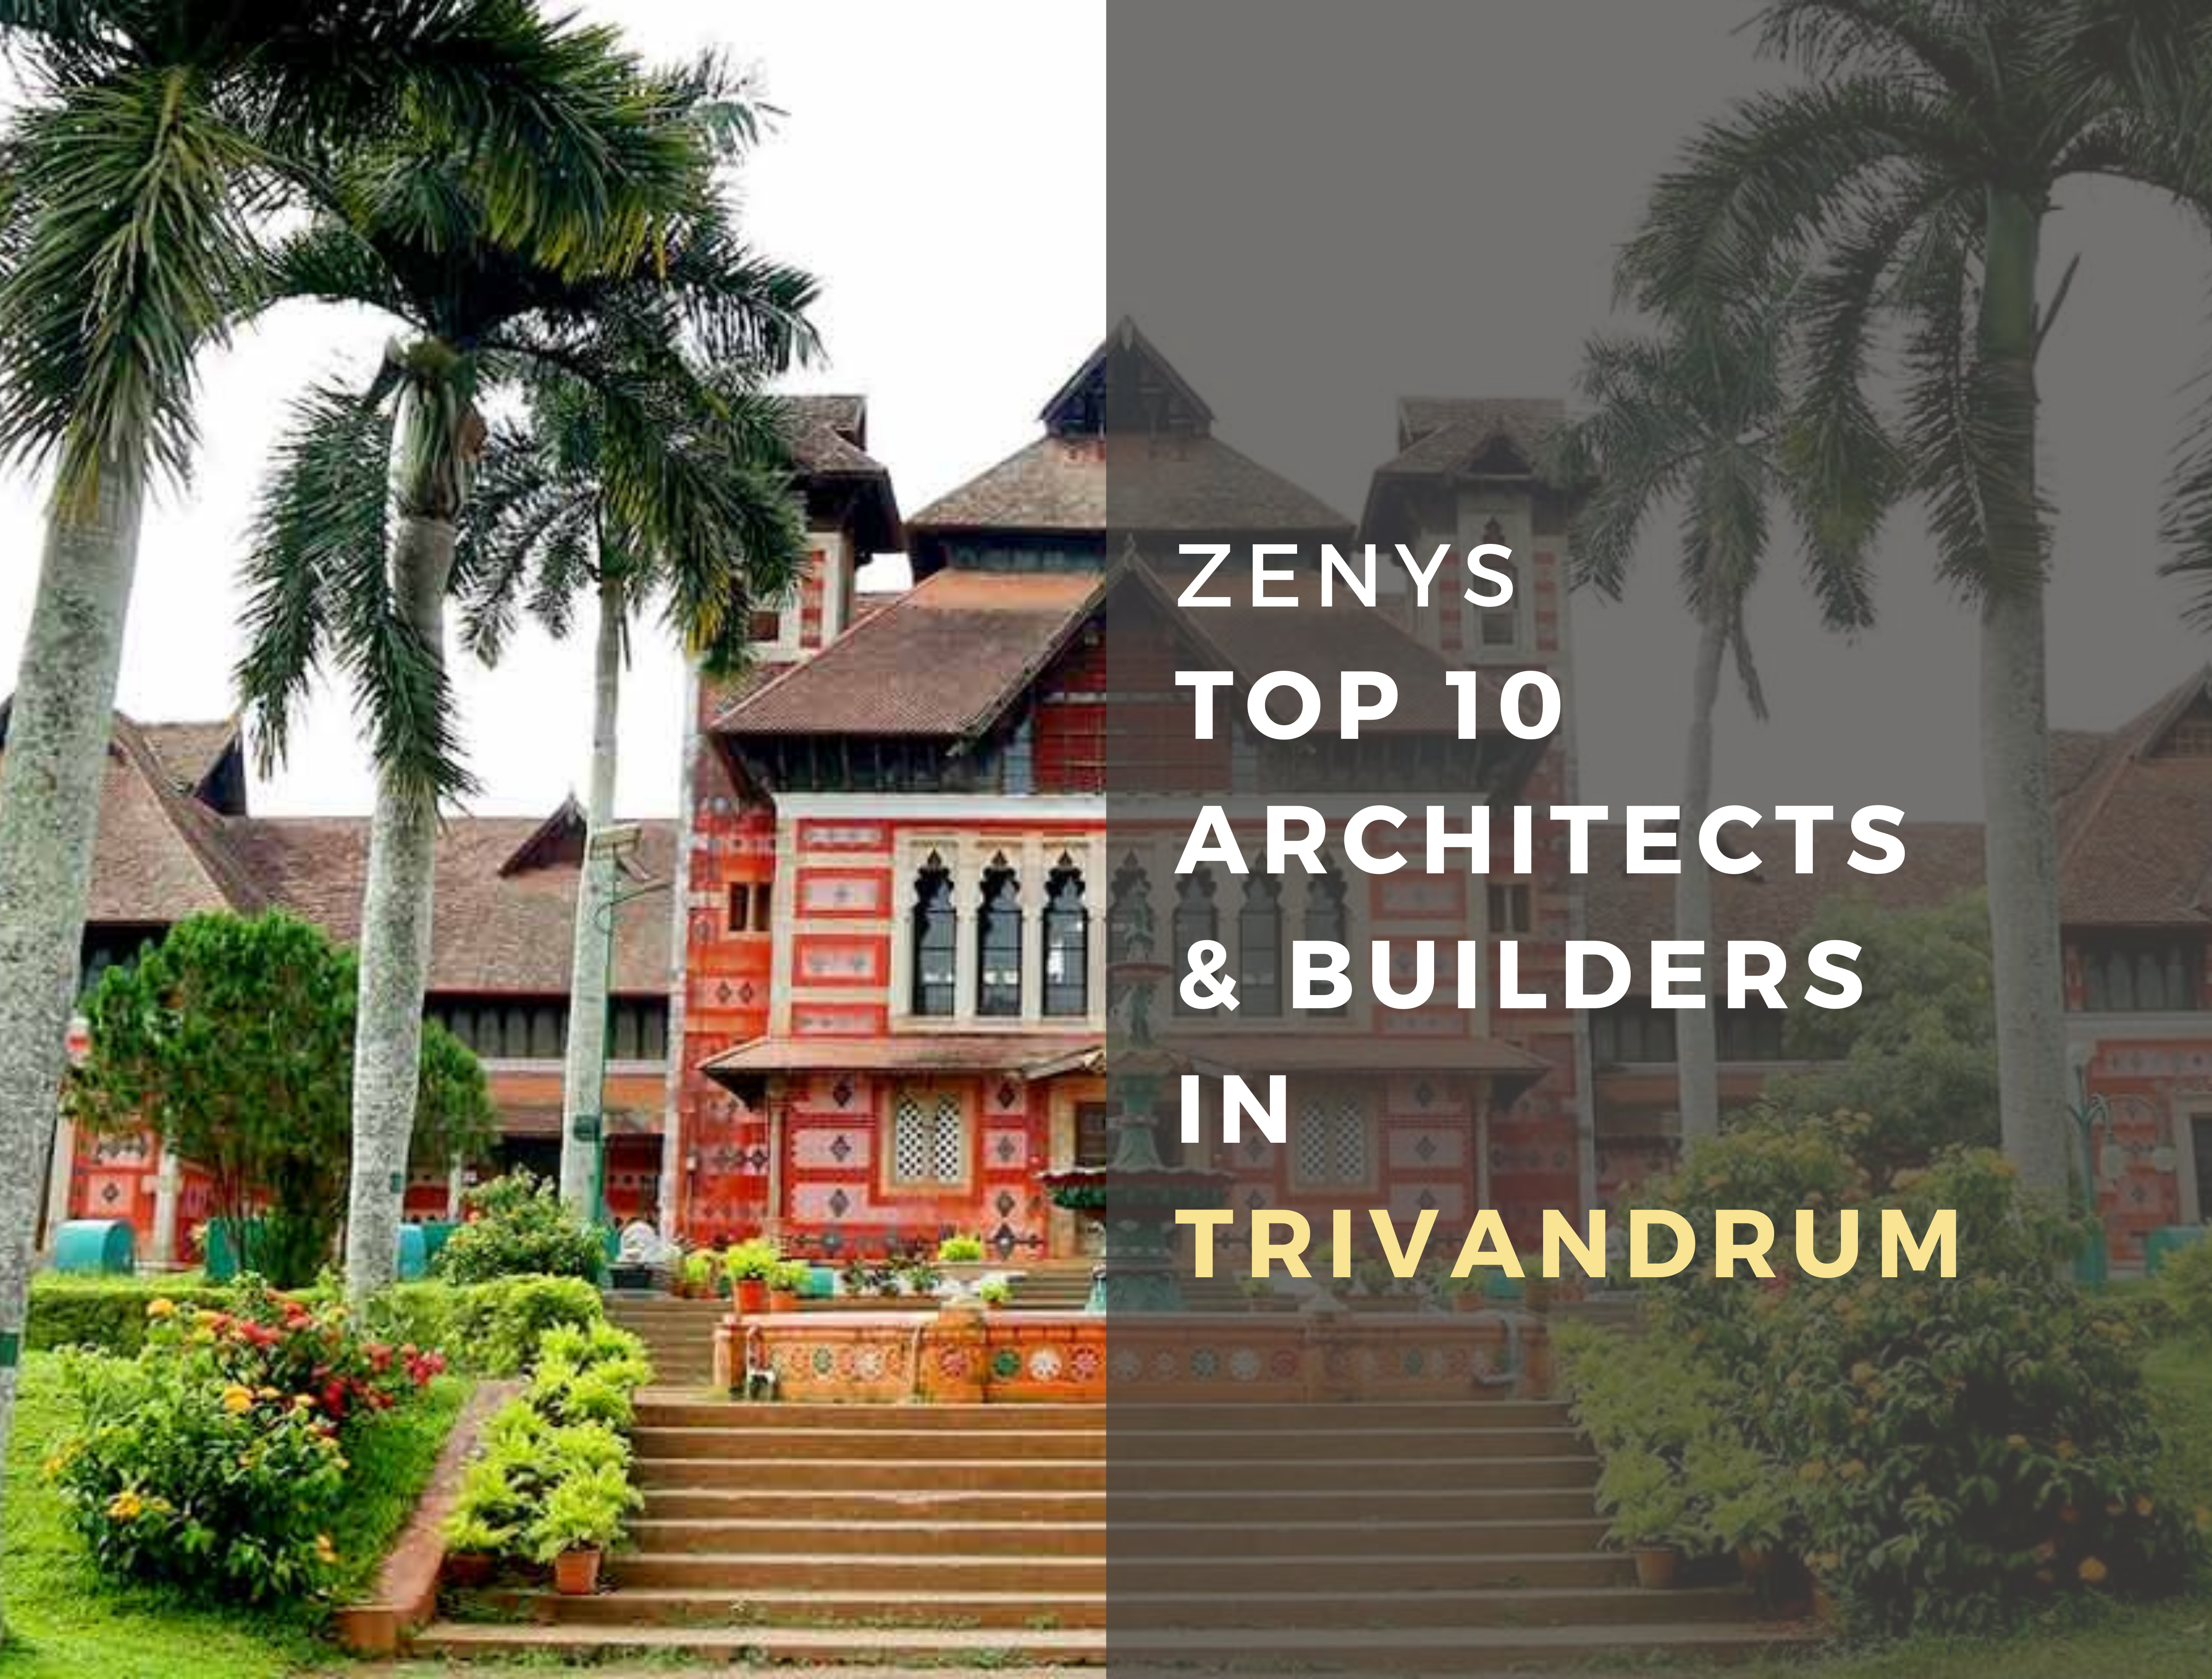 Top 10 Architects in Trivandrum